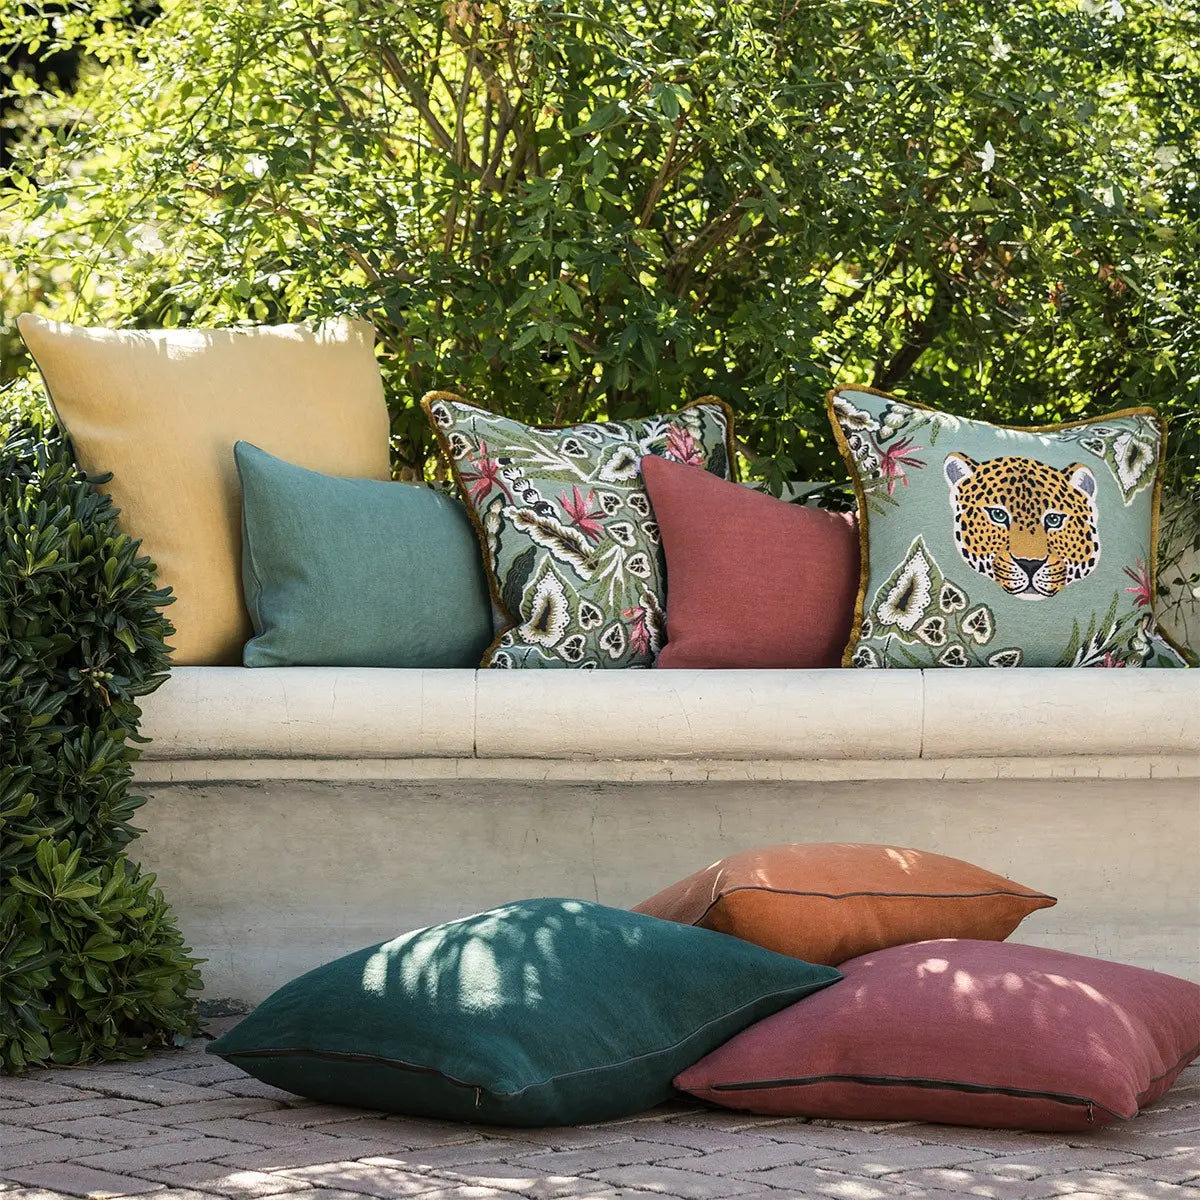 Yves Delorme Bergame Mousse Decorative Pillow 18 x 18 outdoors on a bench